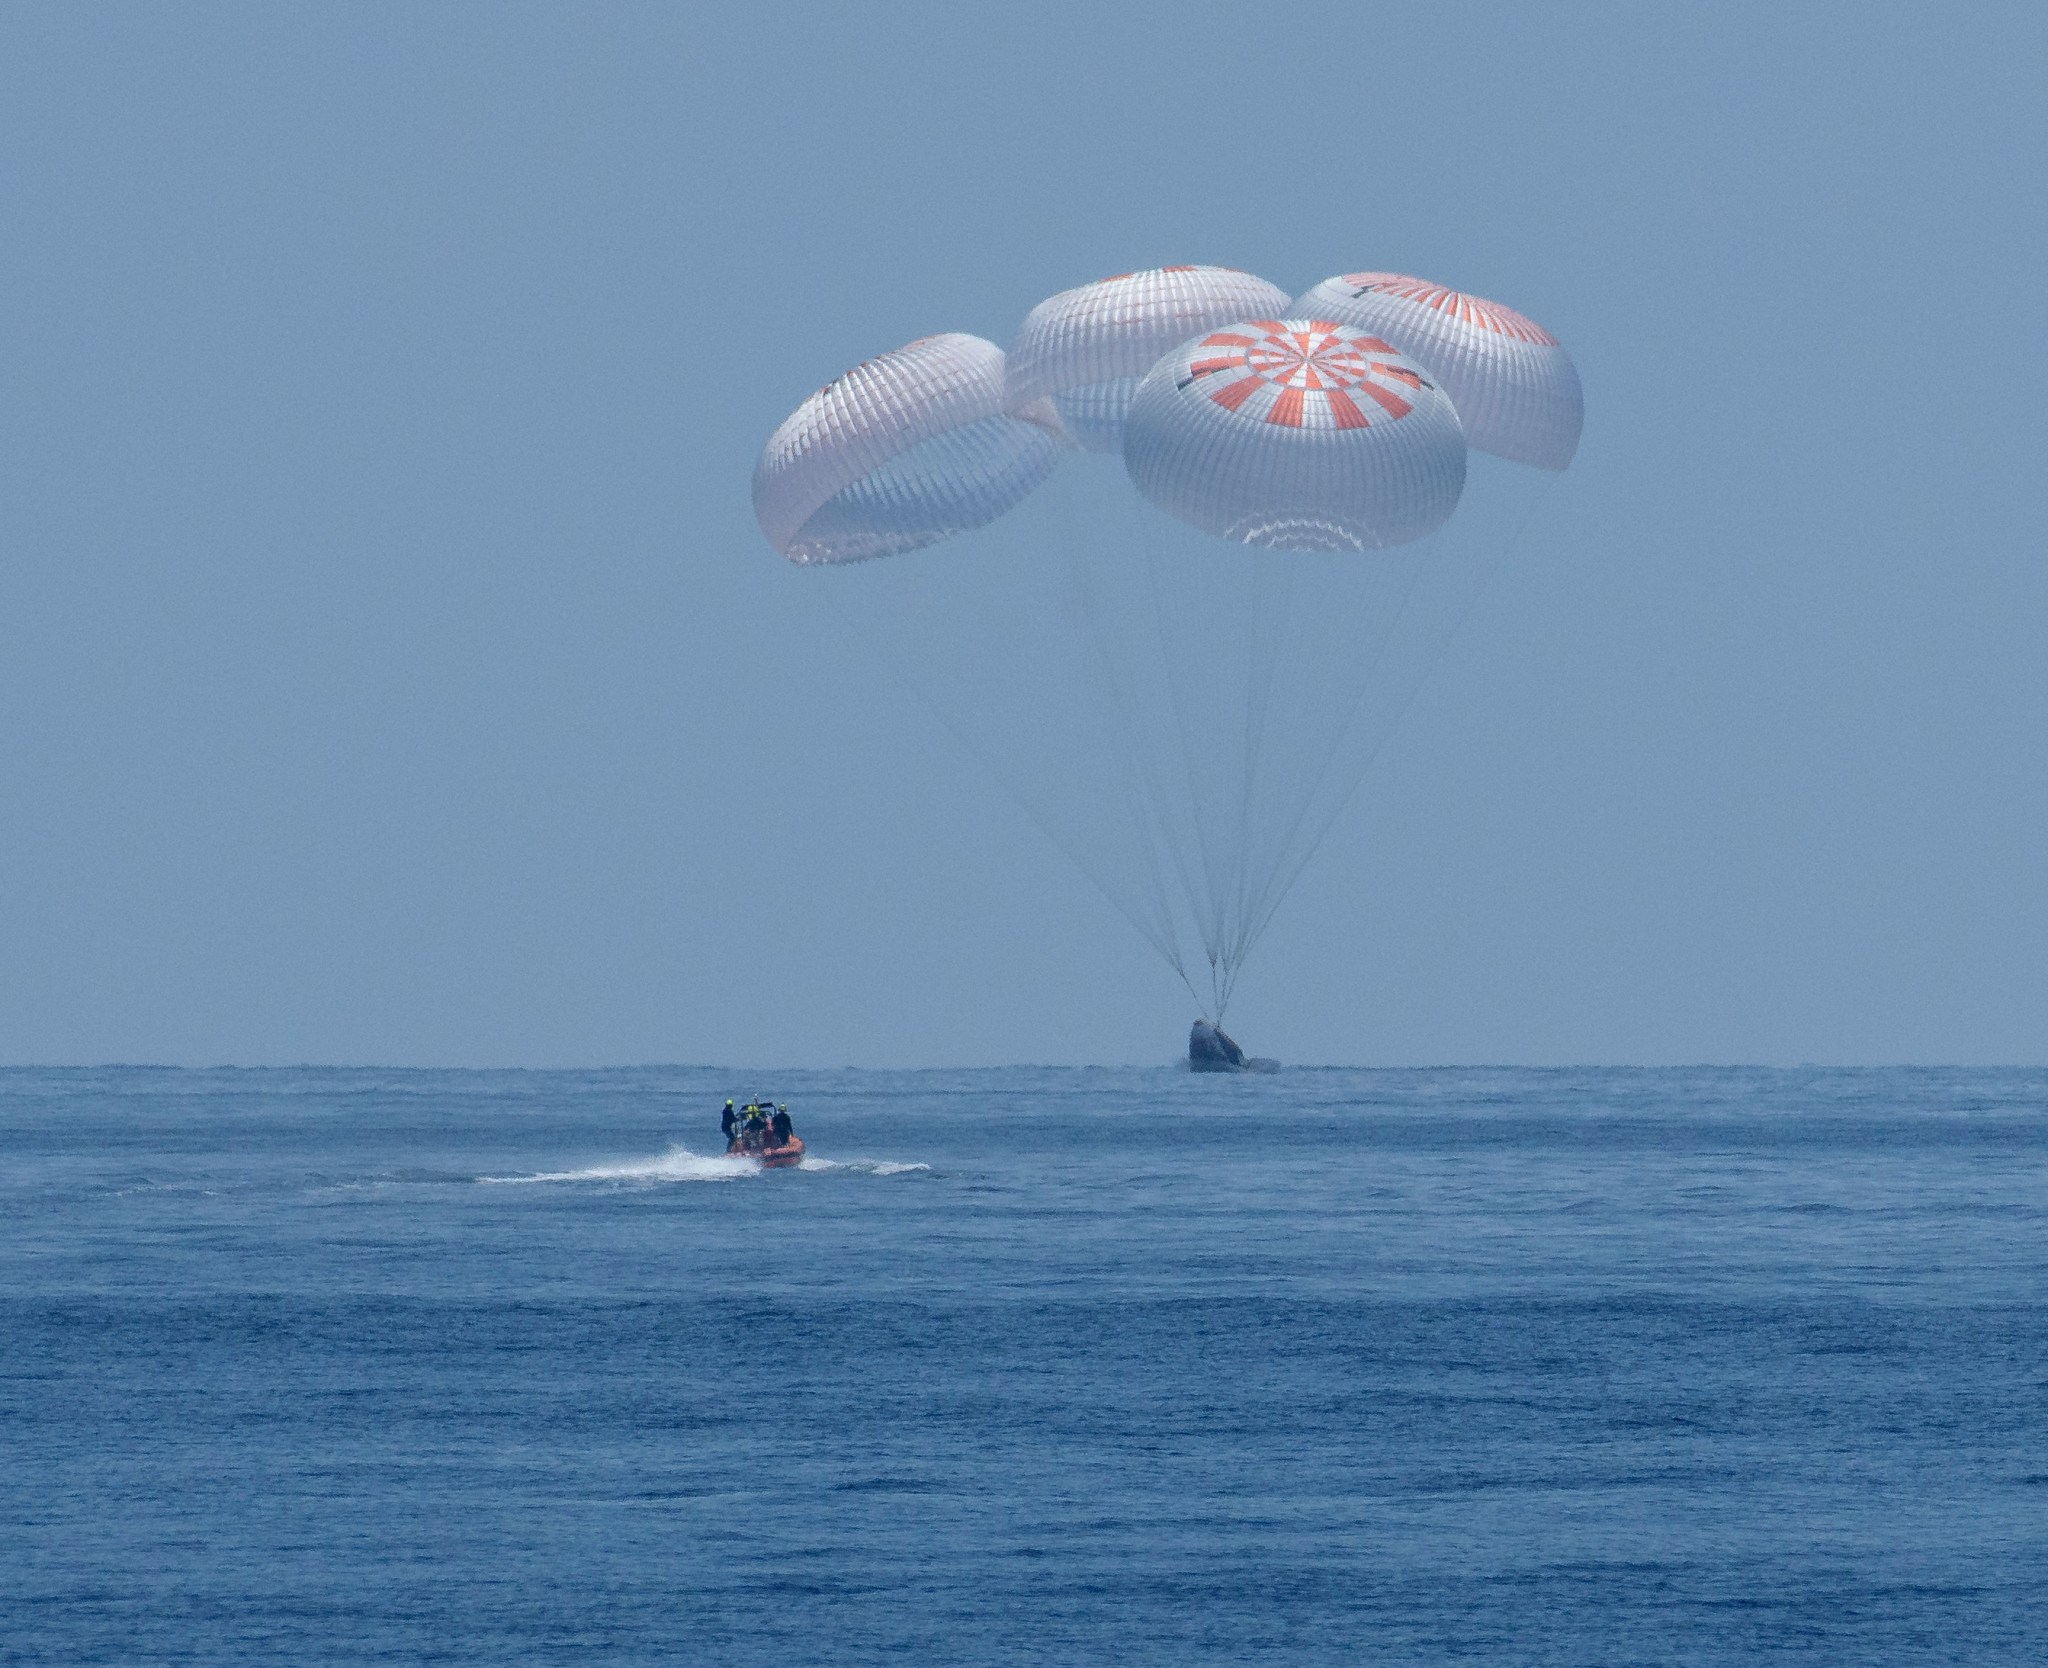 The SpaceX Crew Dragon Endeavour splashes down in the Gulf of Mexico